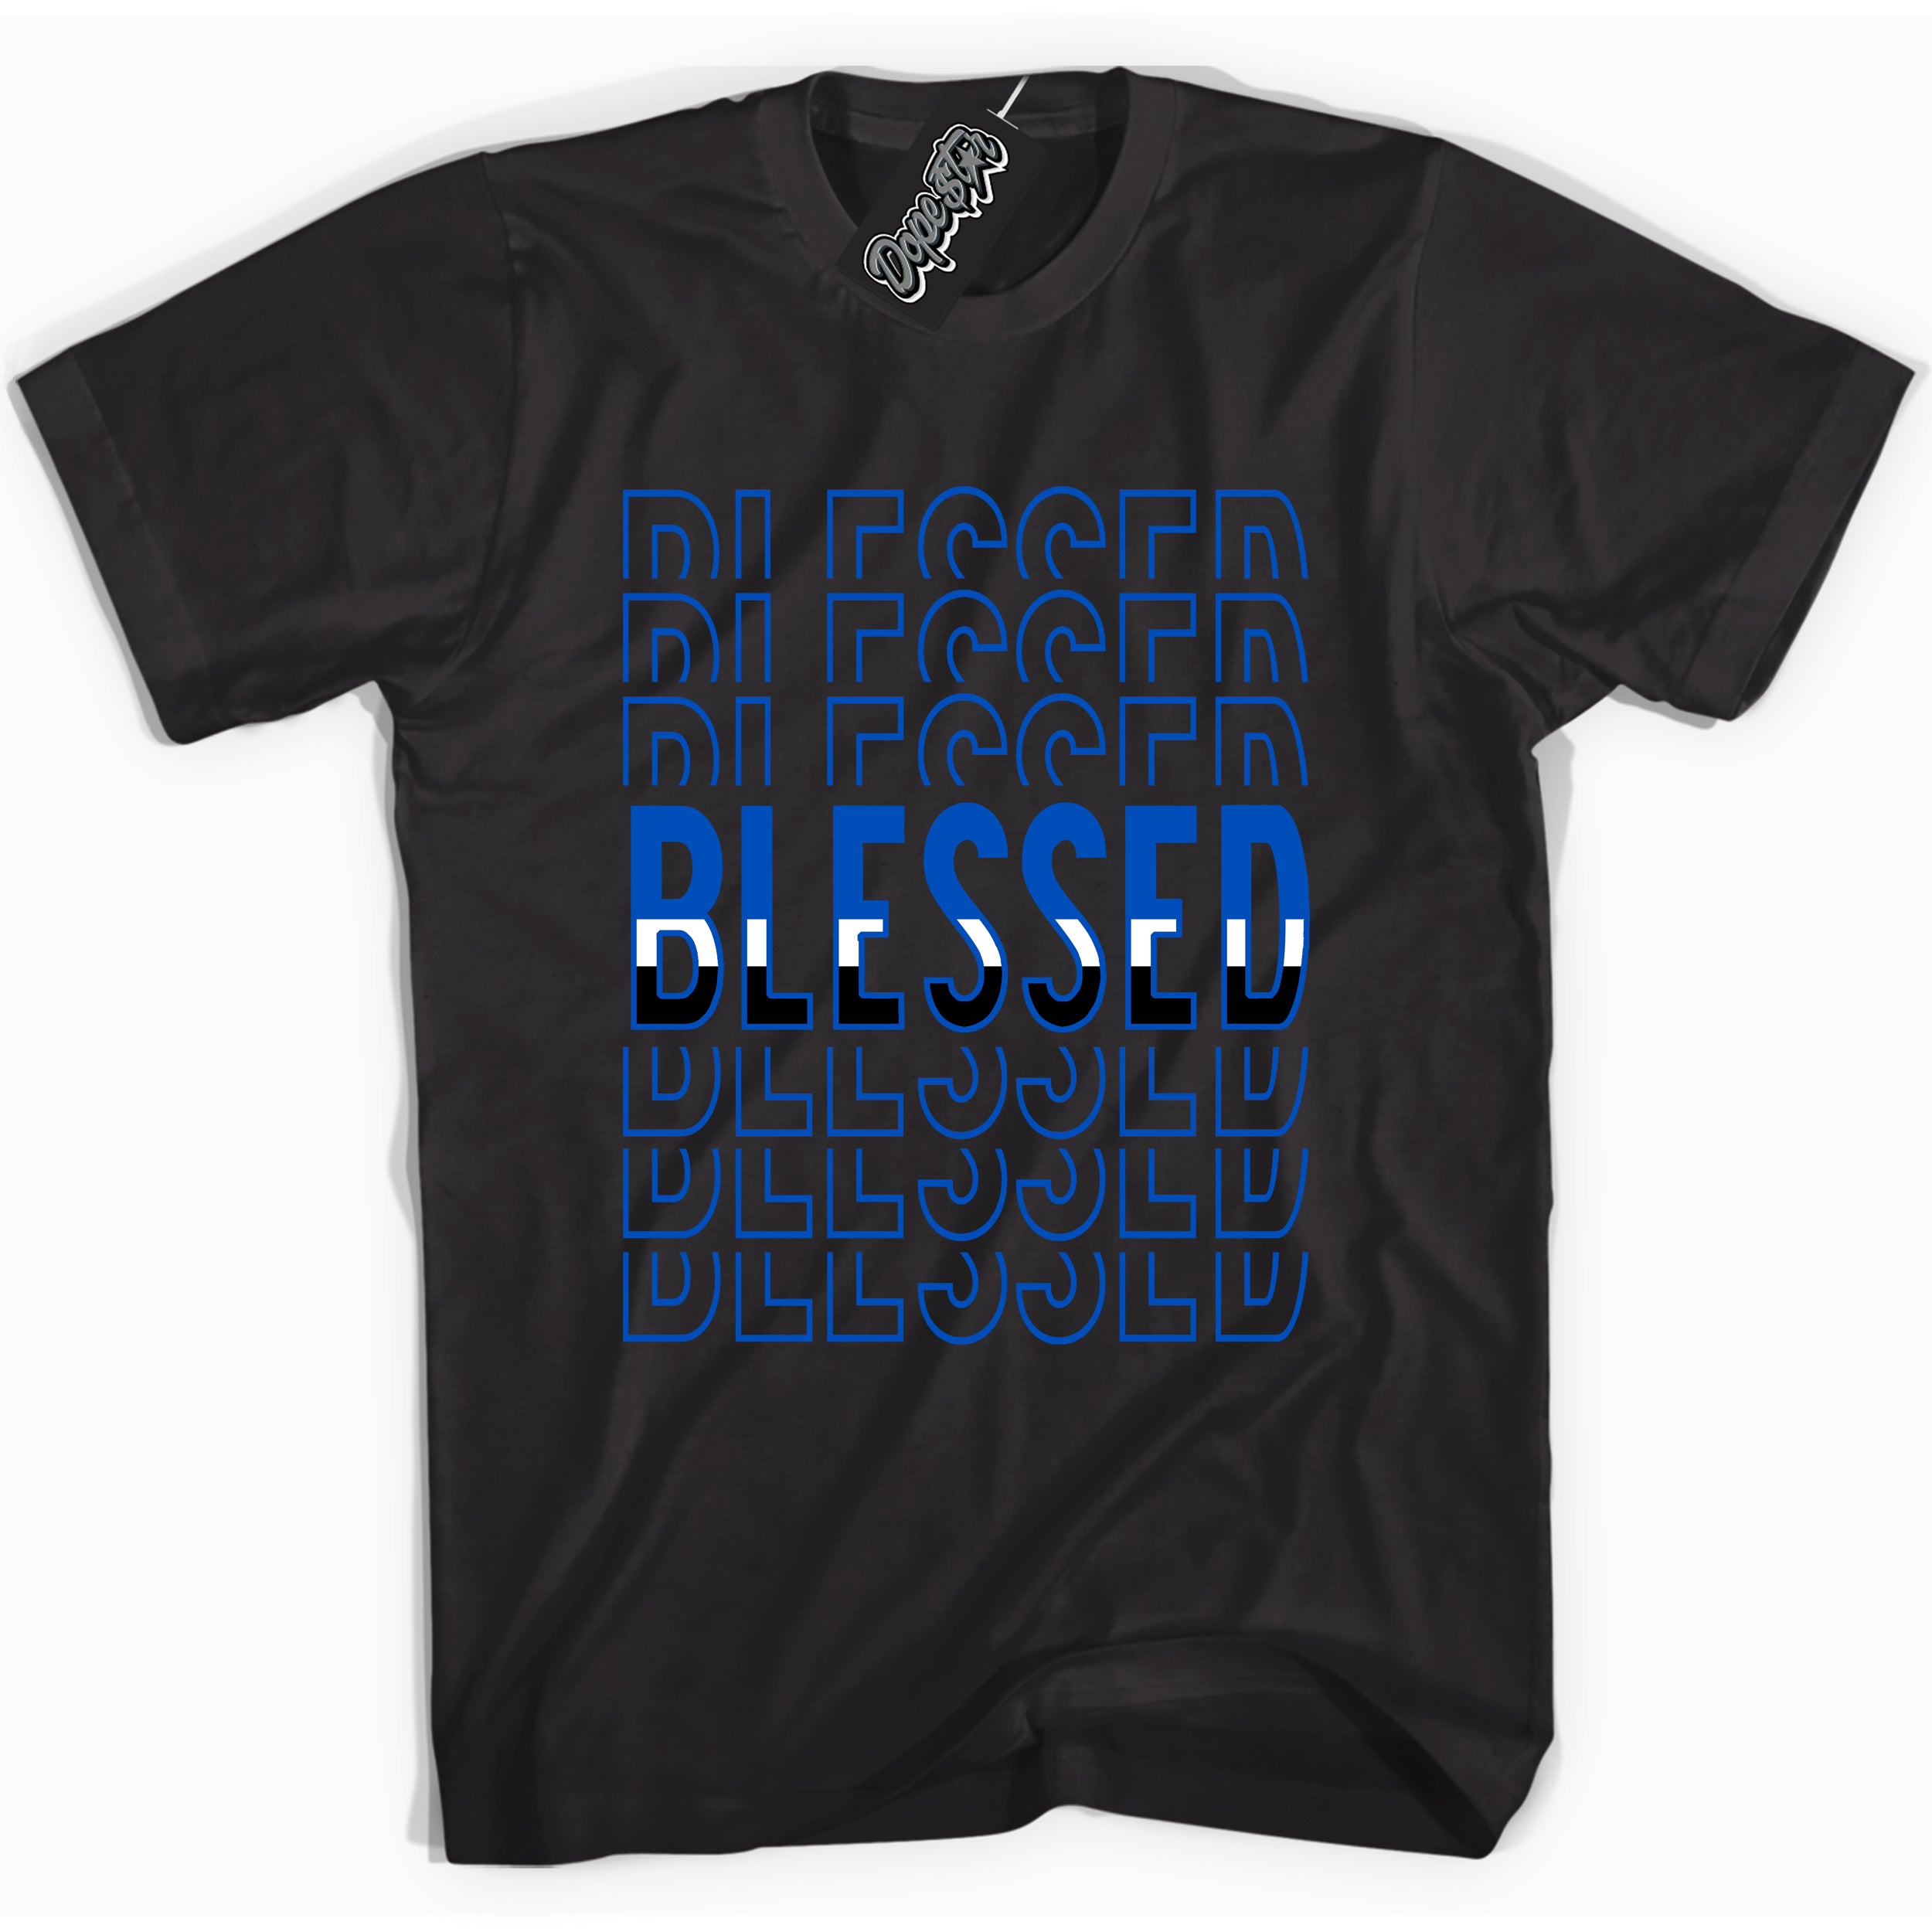 Cool Black graphic tee with Blessed Stacked print, that perfectly matches OG Royal Reimagined 1s sneakers 